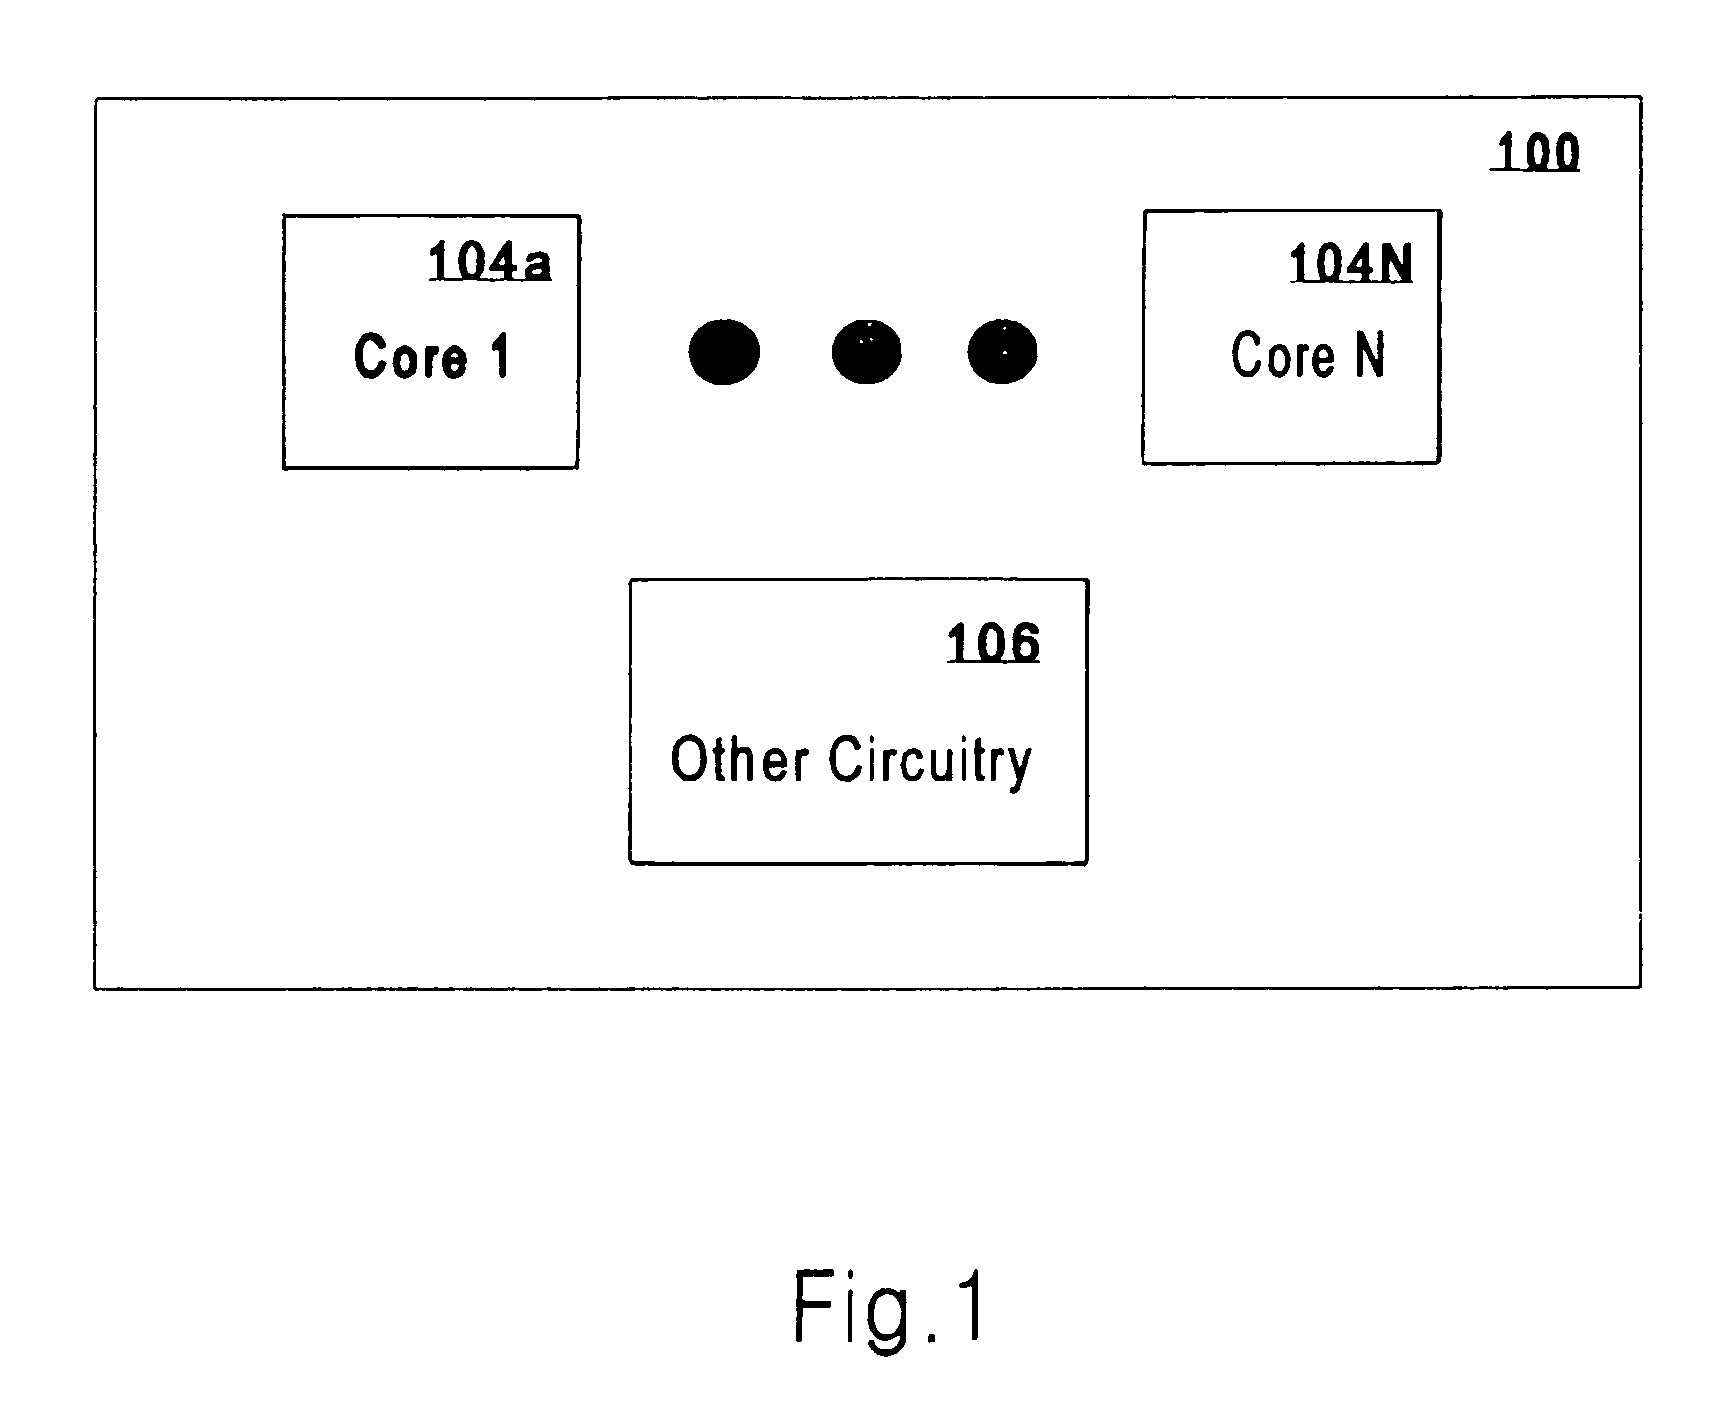 Circuit for dynamic circuit timing synthesis and monitoring of critical paths and environmental conditions of an integrated circuit